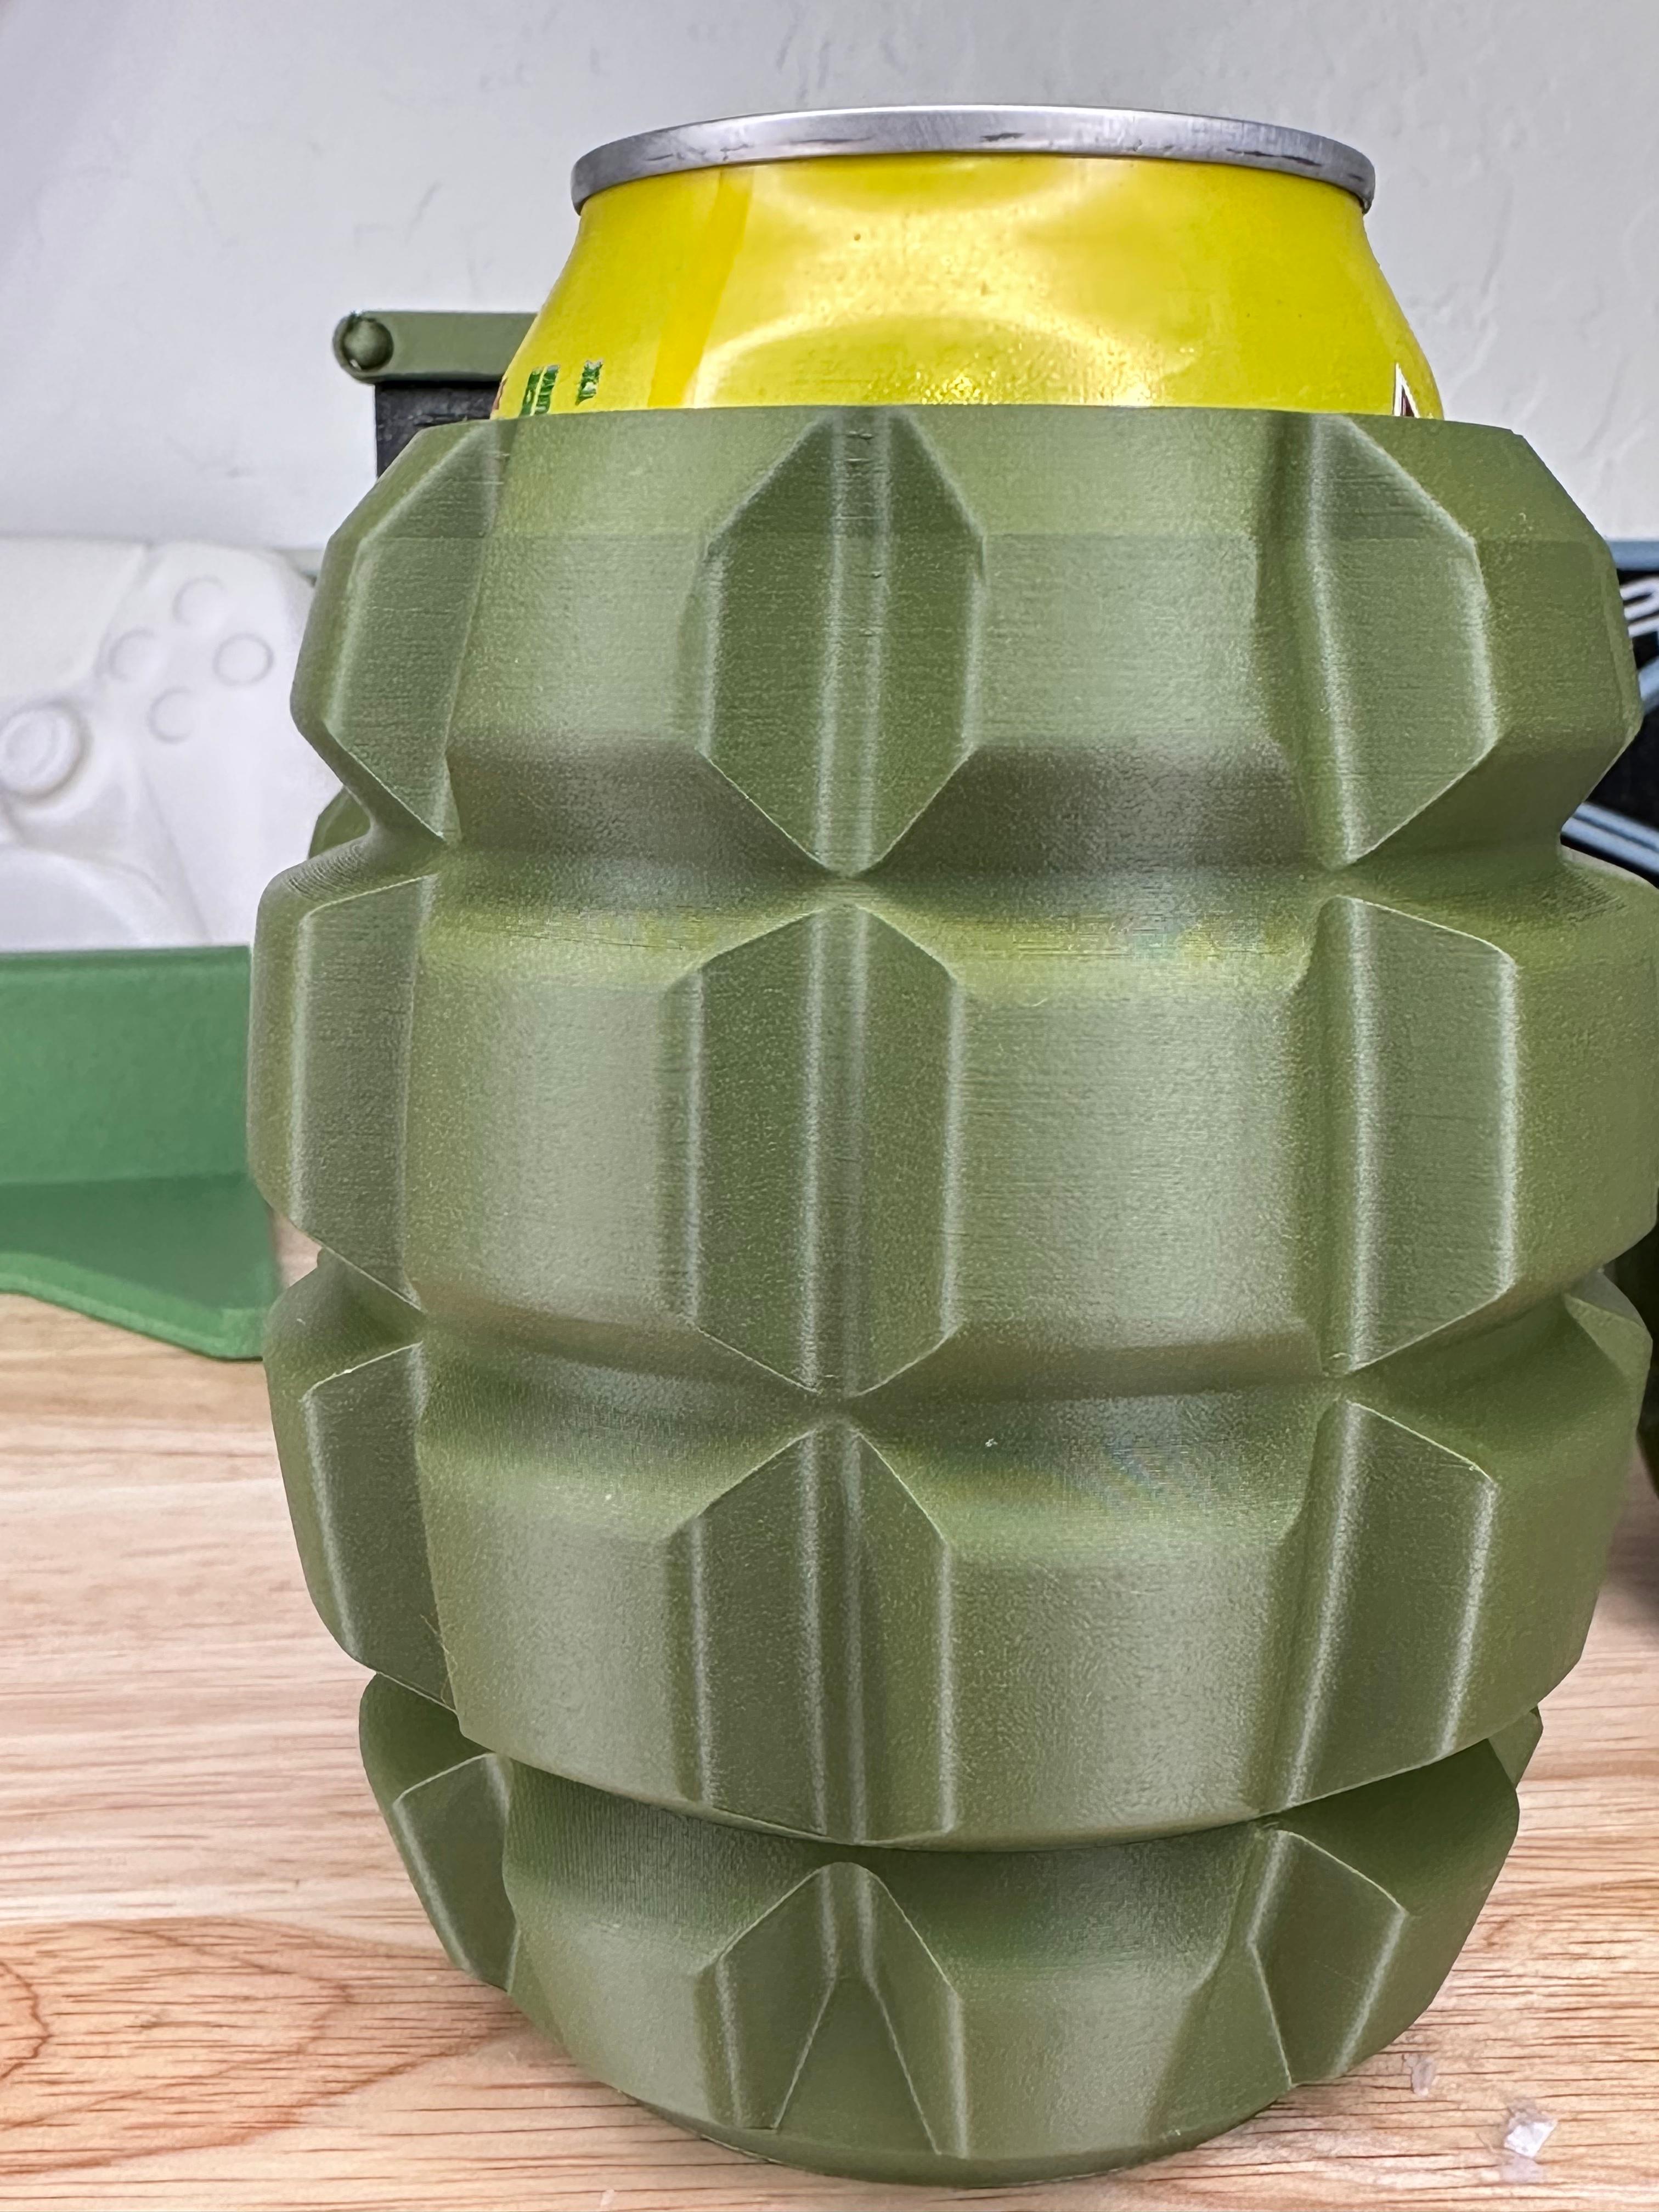 Pineapple Grenade Can Cup - An Explosive can cup to rule them all 3d model